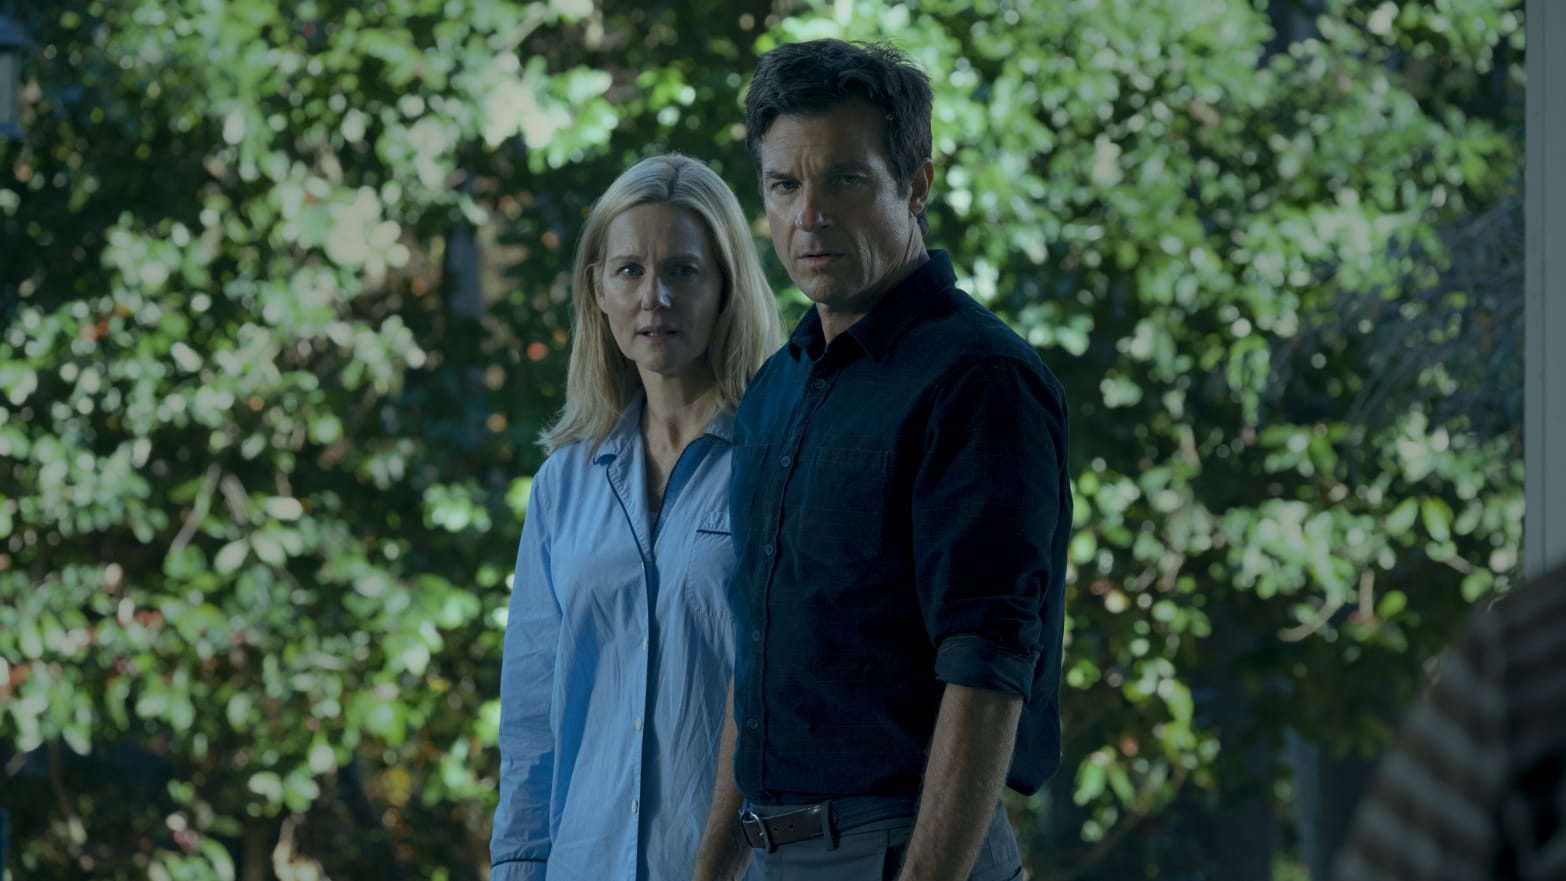 New Ozark Trailer Released Ahead of Fourth and Final Season [WATCH]